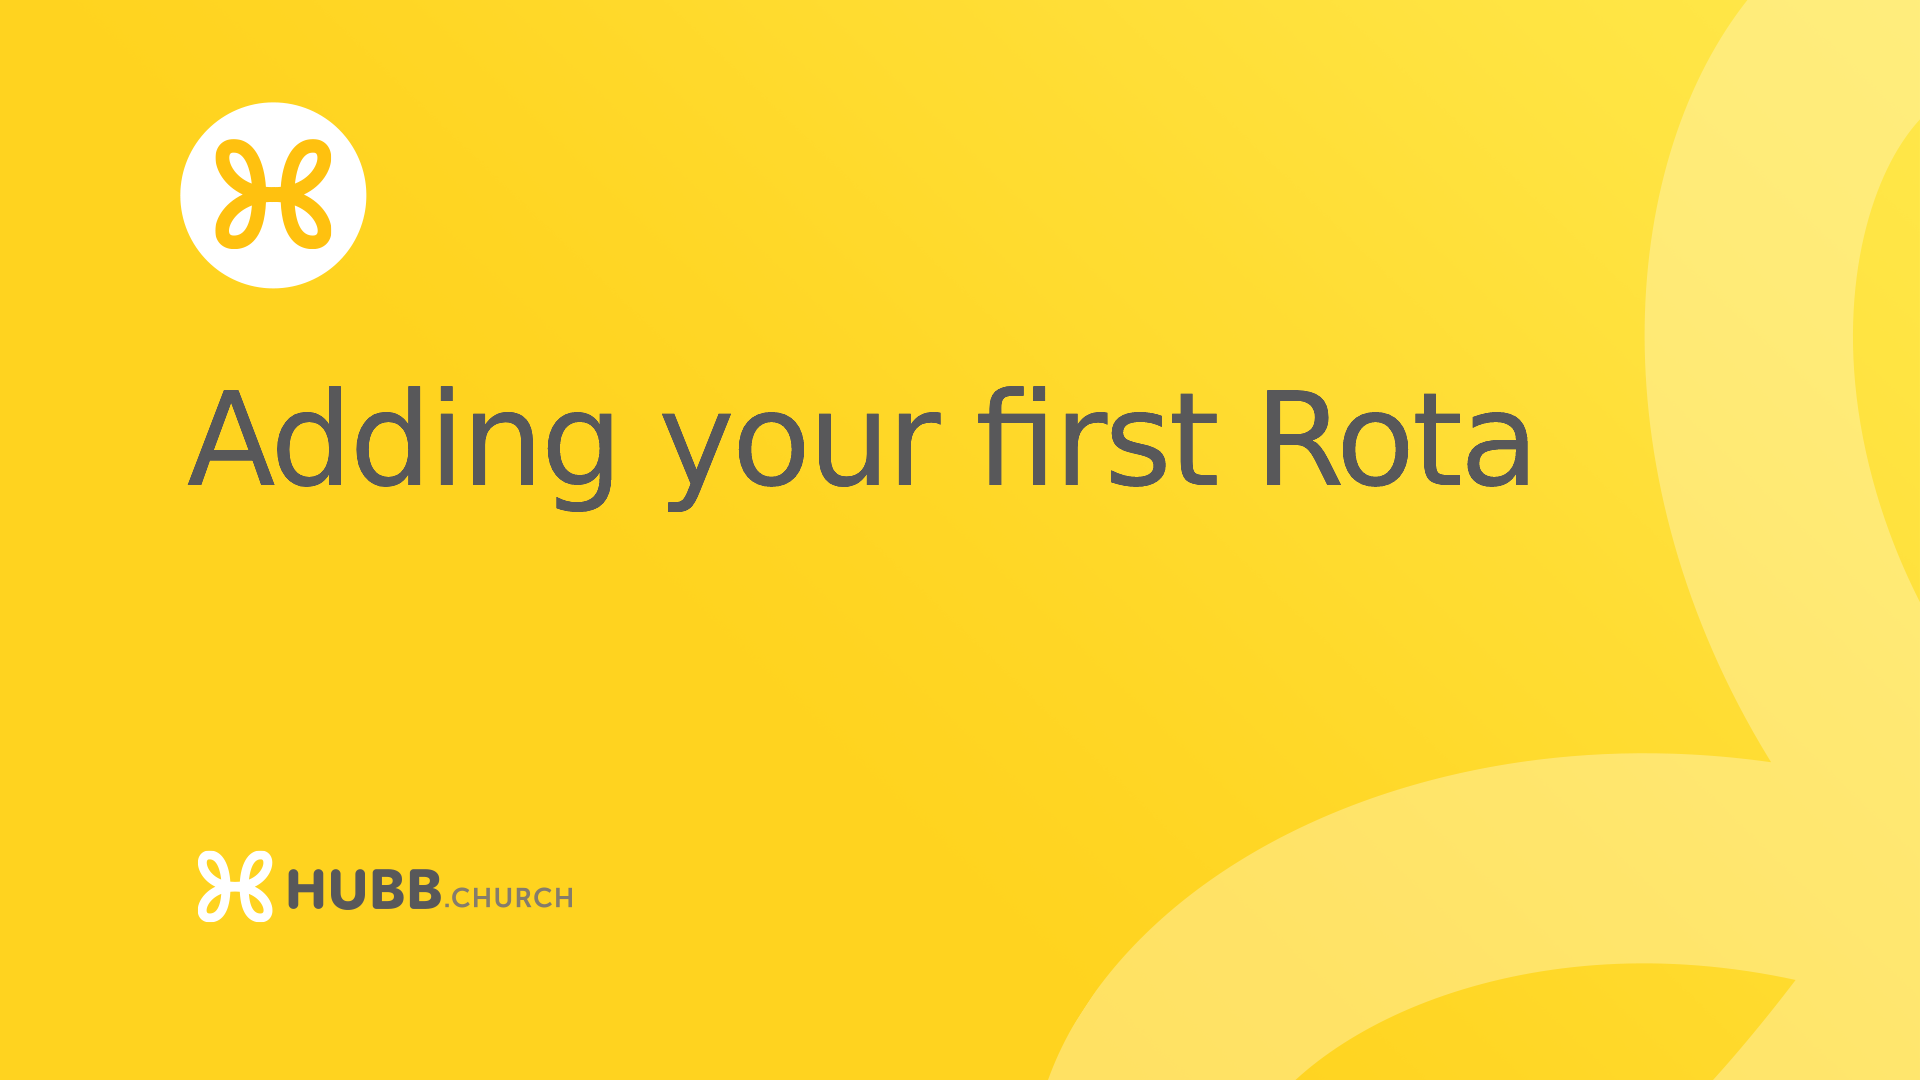 Adding your first rota